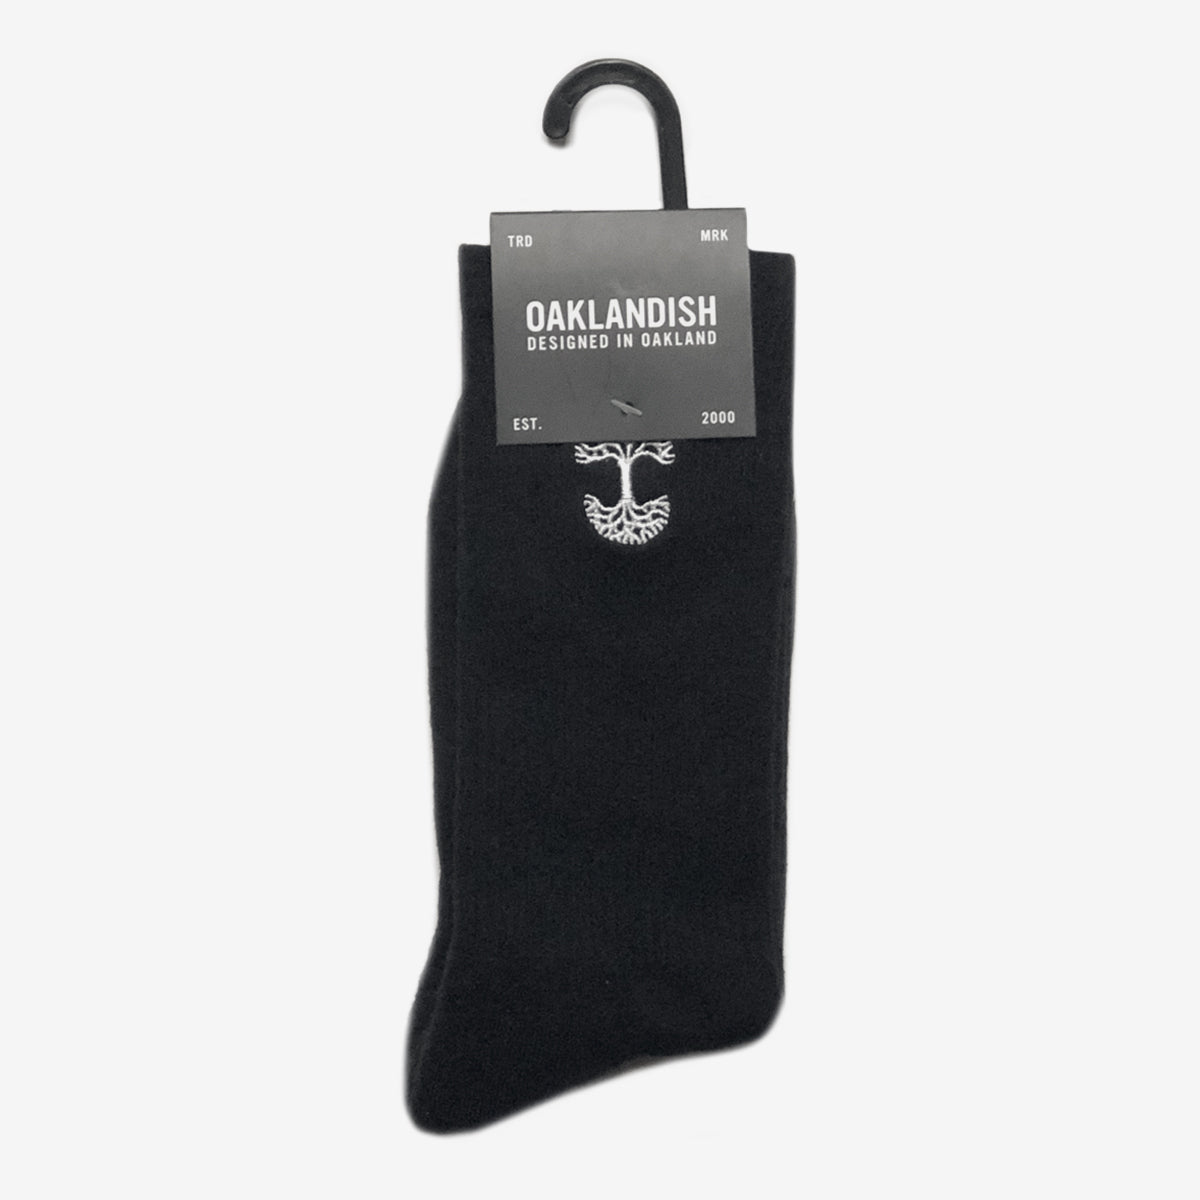 High-cut men's black crew socks with white embroidered Oaklandish logo at the top wrapped in Oaklandish retail packaging.